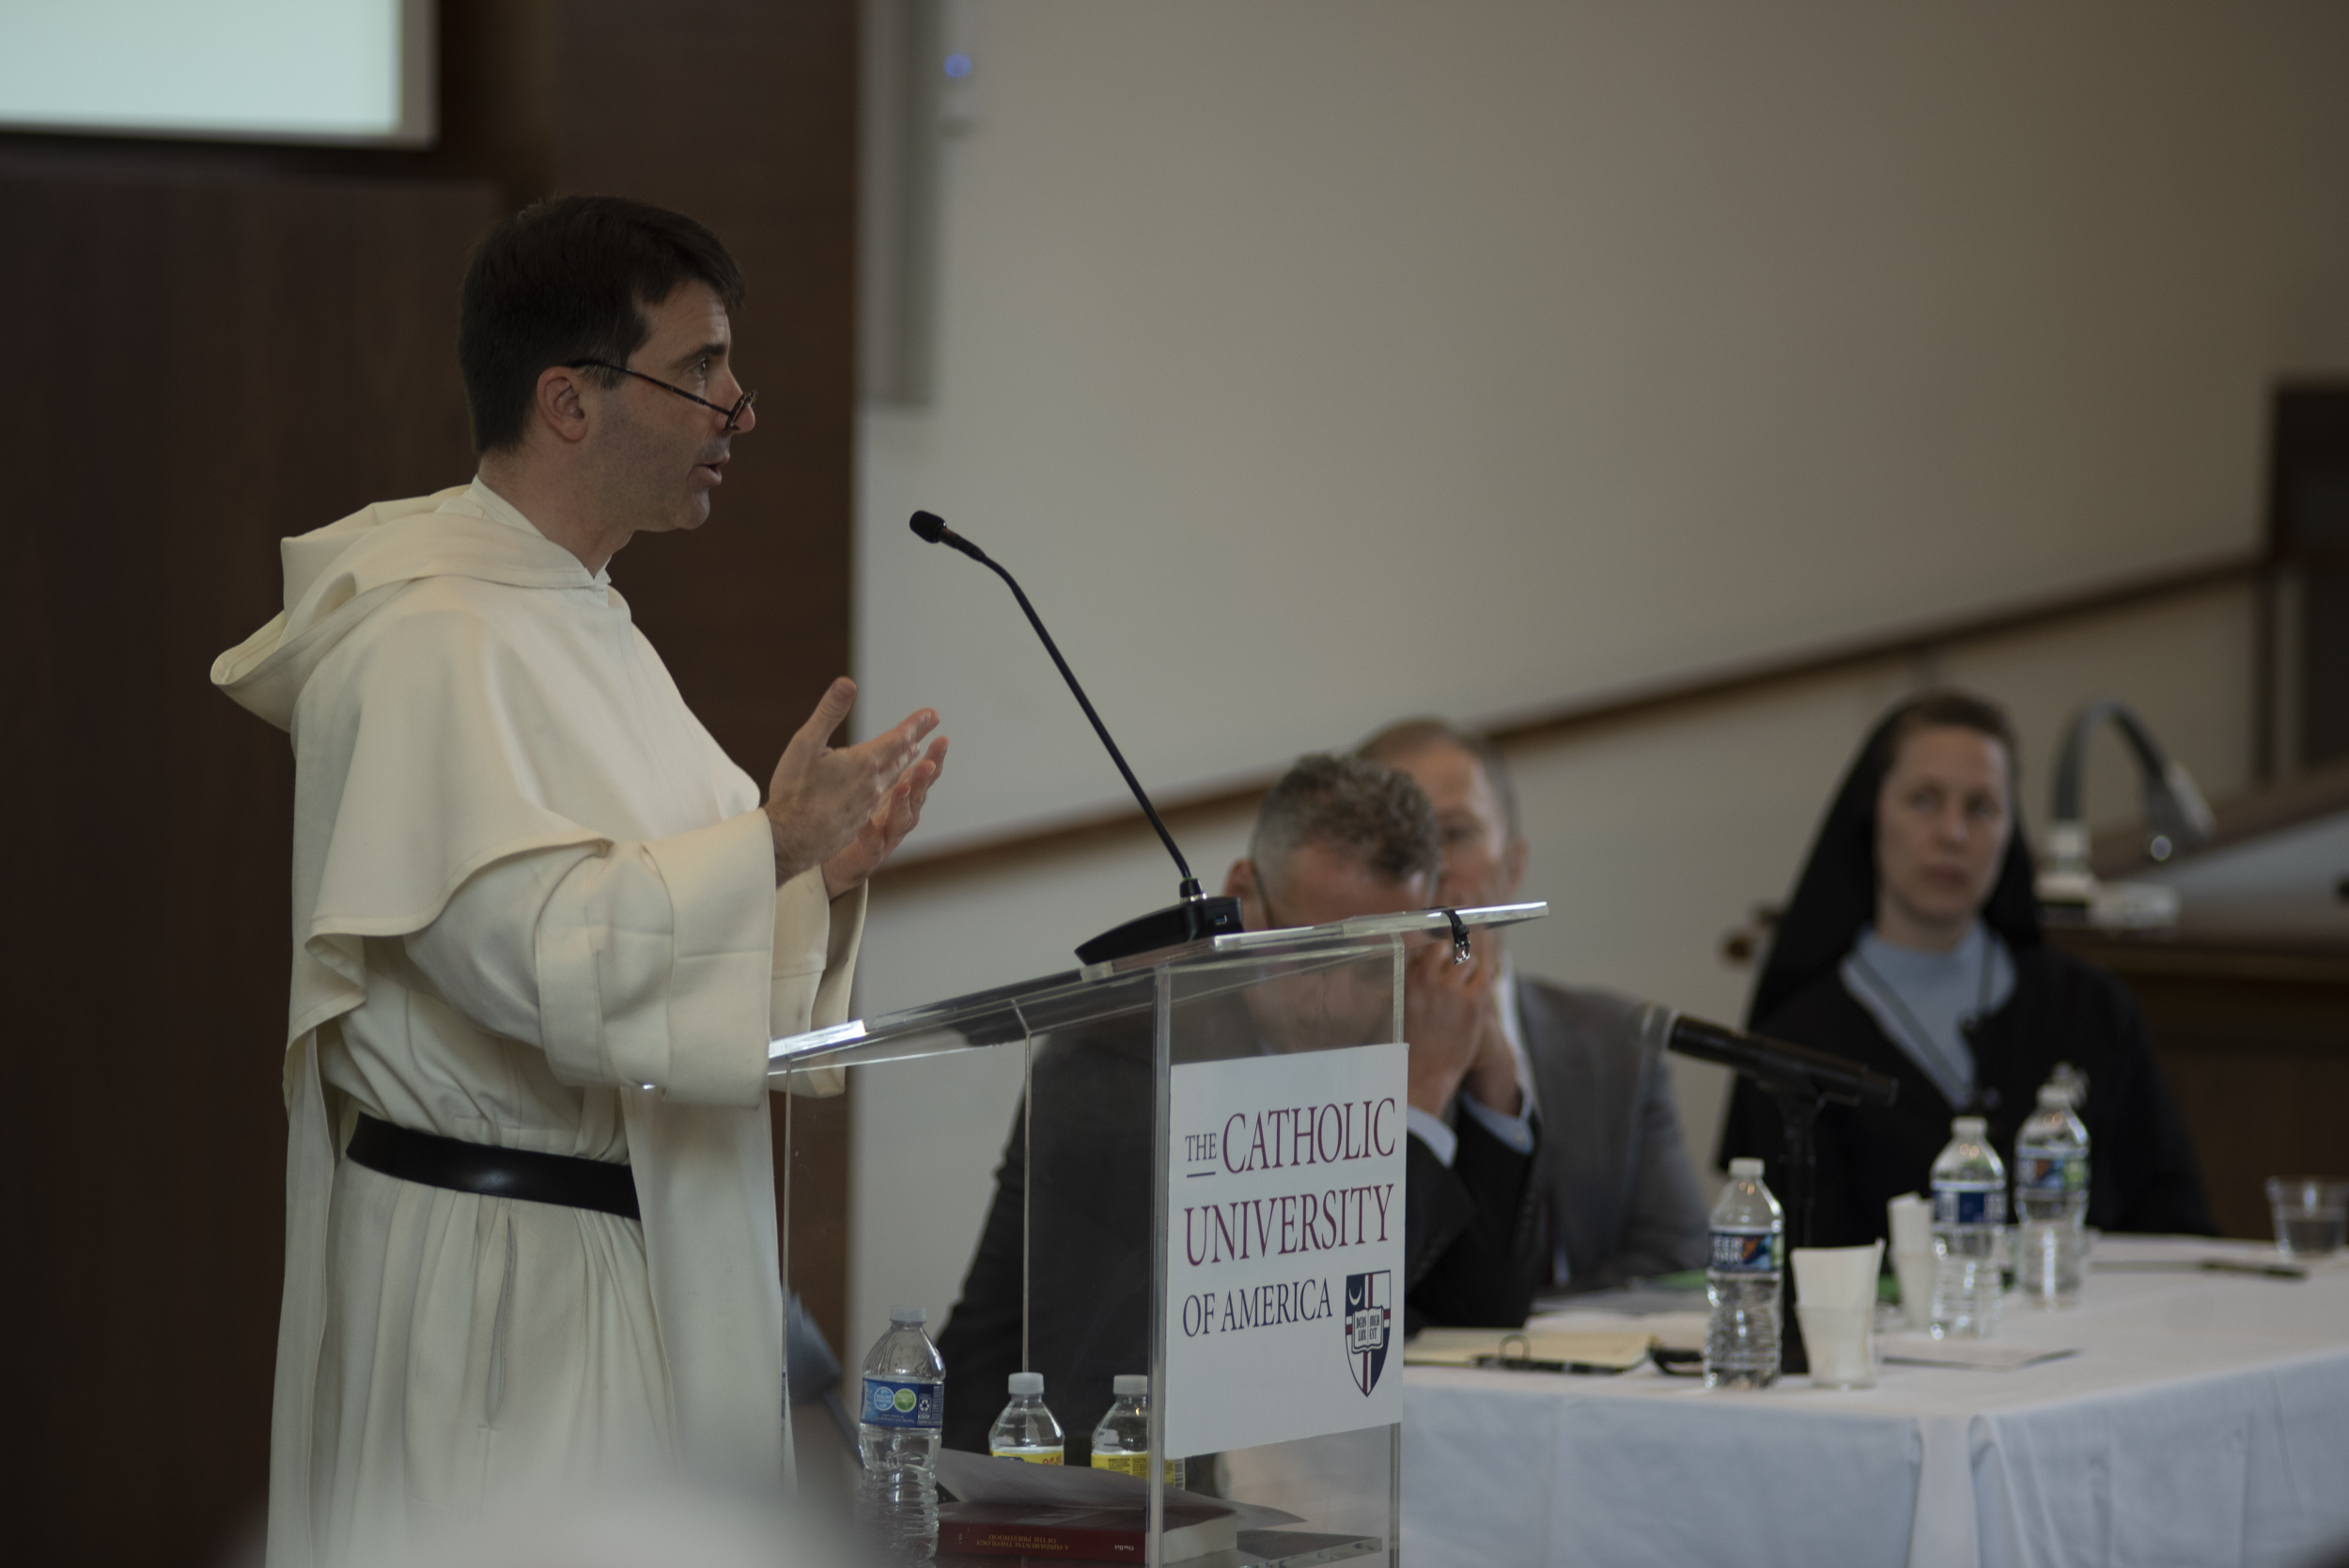 Father Dominic Legge, director of the Thomistic Institute, speaks on Christology and the priesthood at the symposium on the priesthood at The Catholic University of America May16